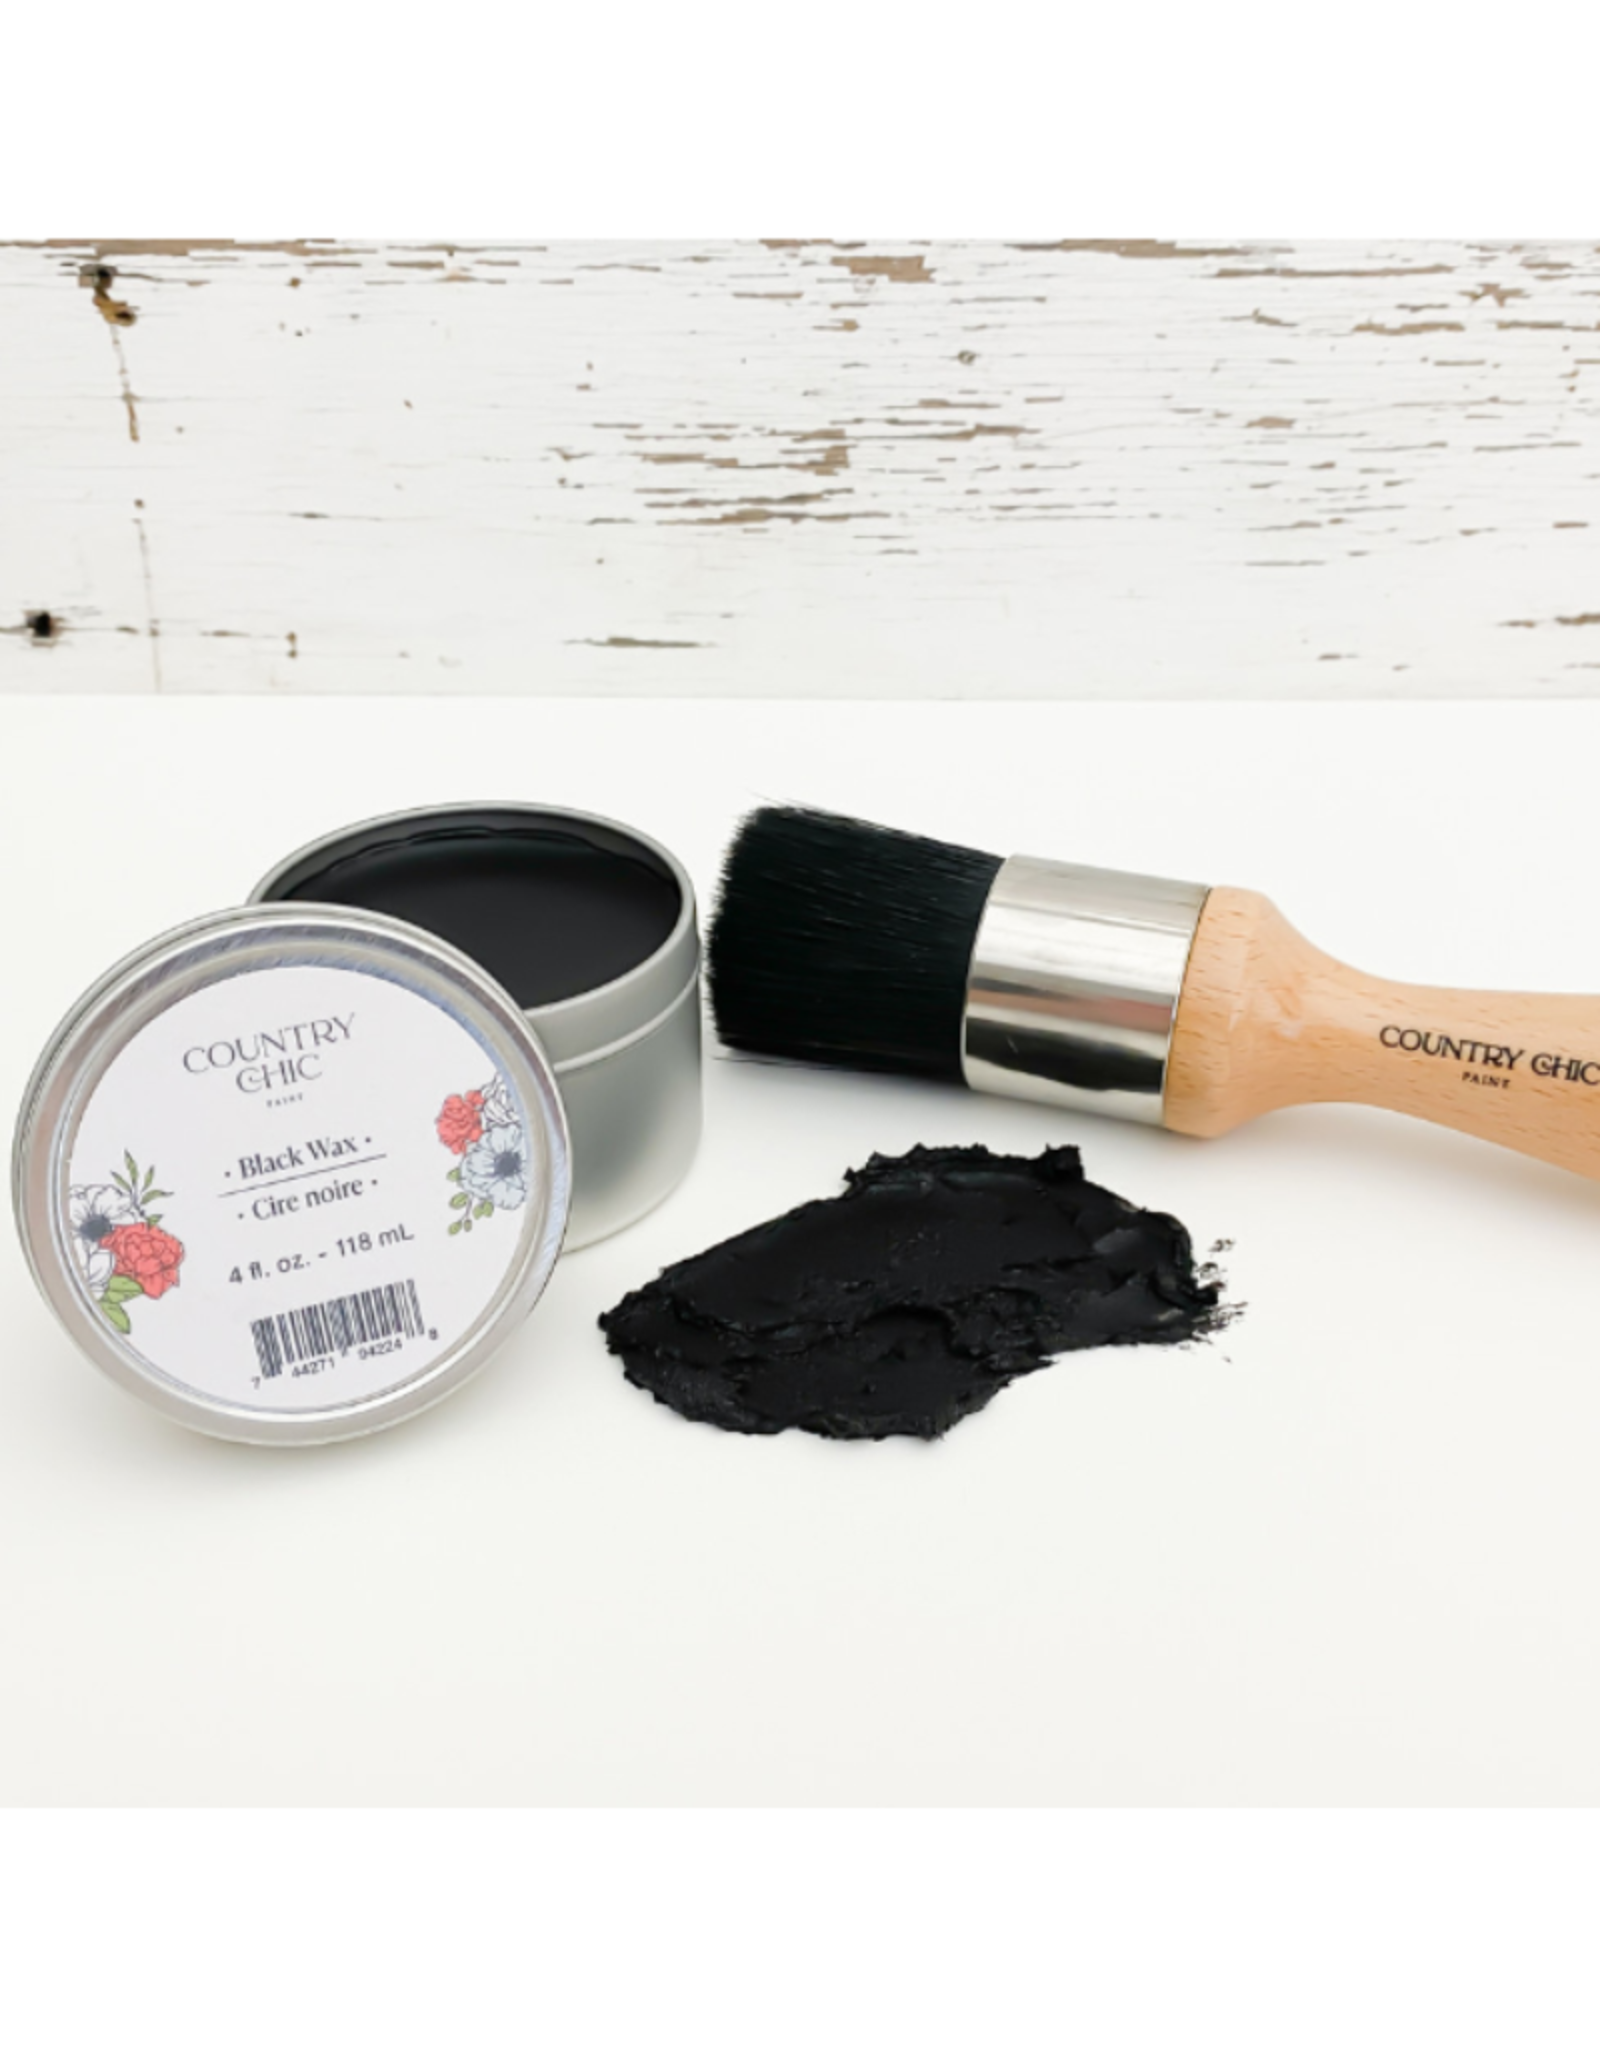 Country Chic Country Chic Black Wax 4oz